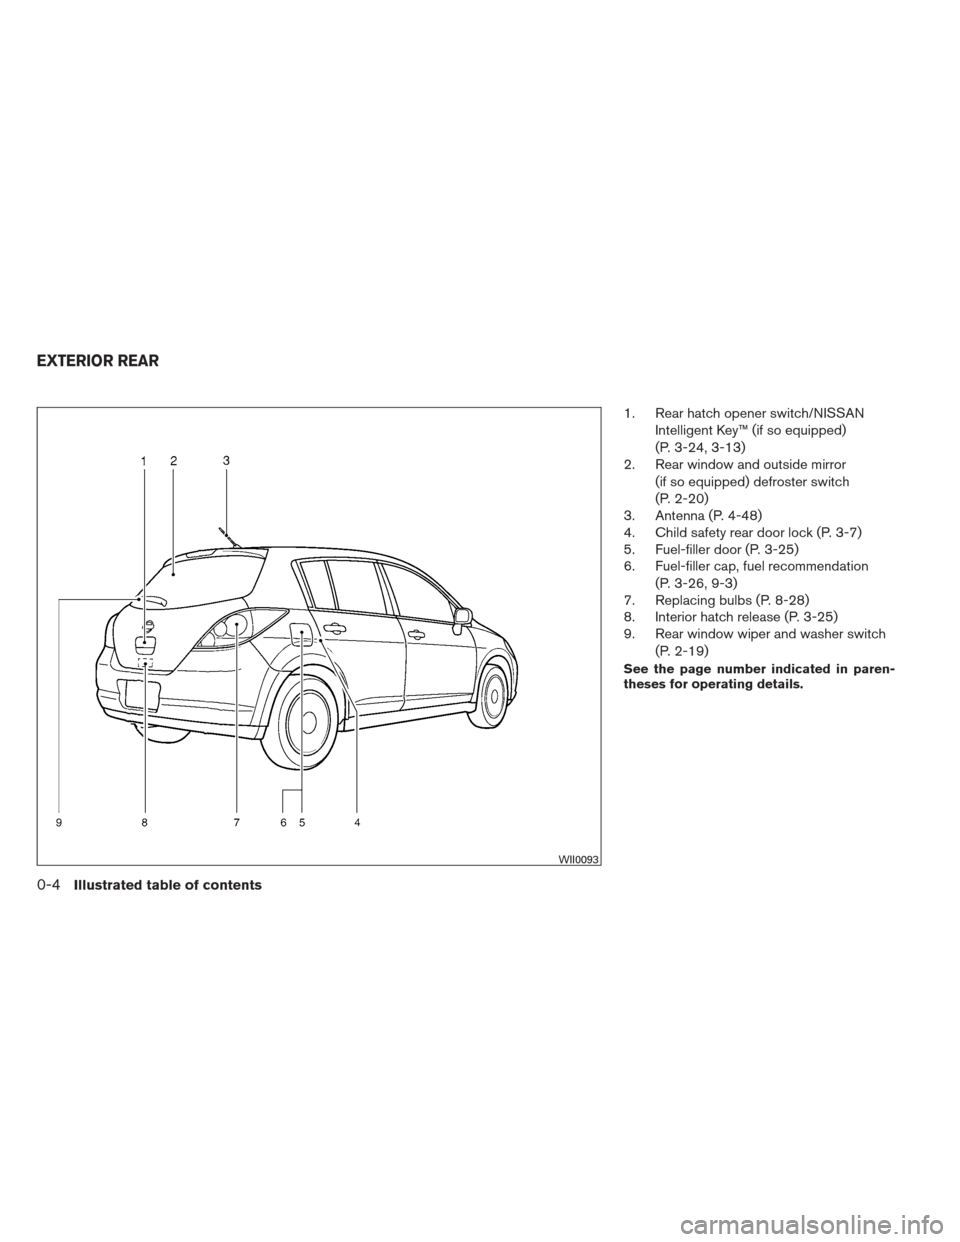 NISSAN VERSA HATCHBACK 2012 1.G Owners Manual 1. Rear hatch opener switch/NISSANIntelligent Key™ (if so equipped)
(P. 3-24, 3-13)
2. Rear window and outside mirror
(if so equipped) defroster switch
(P. 2-20)
3. Antenna (P. 4-48)
4. Child safety